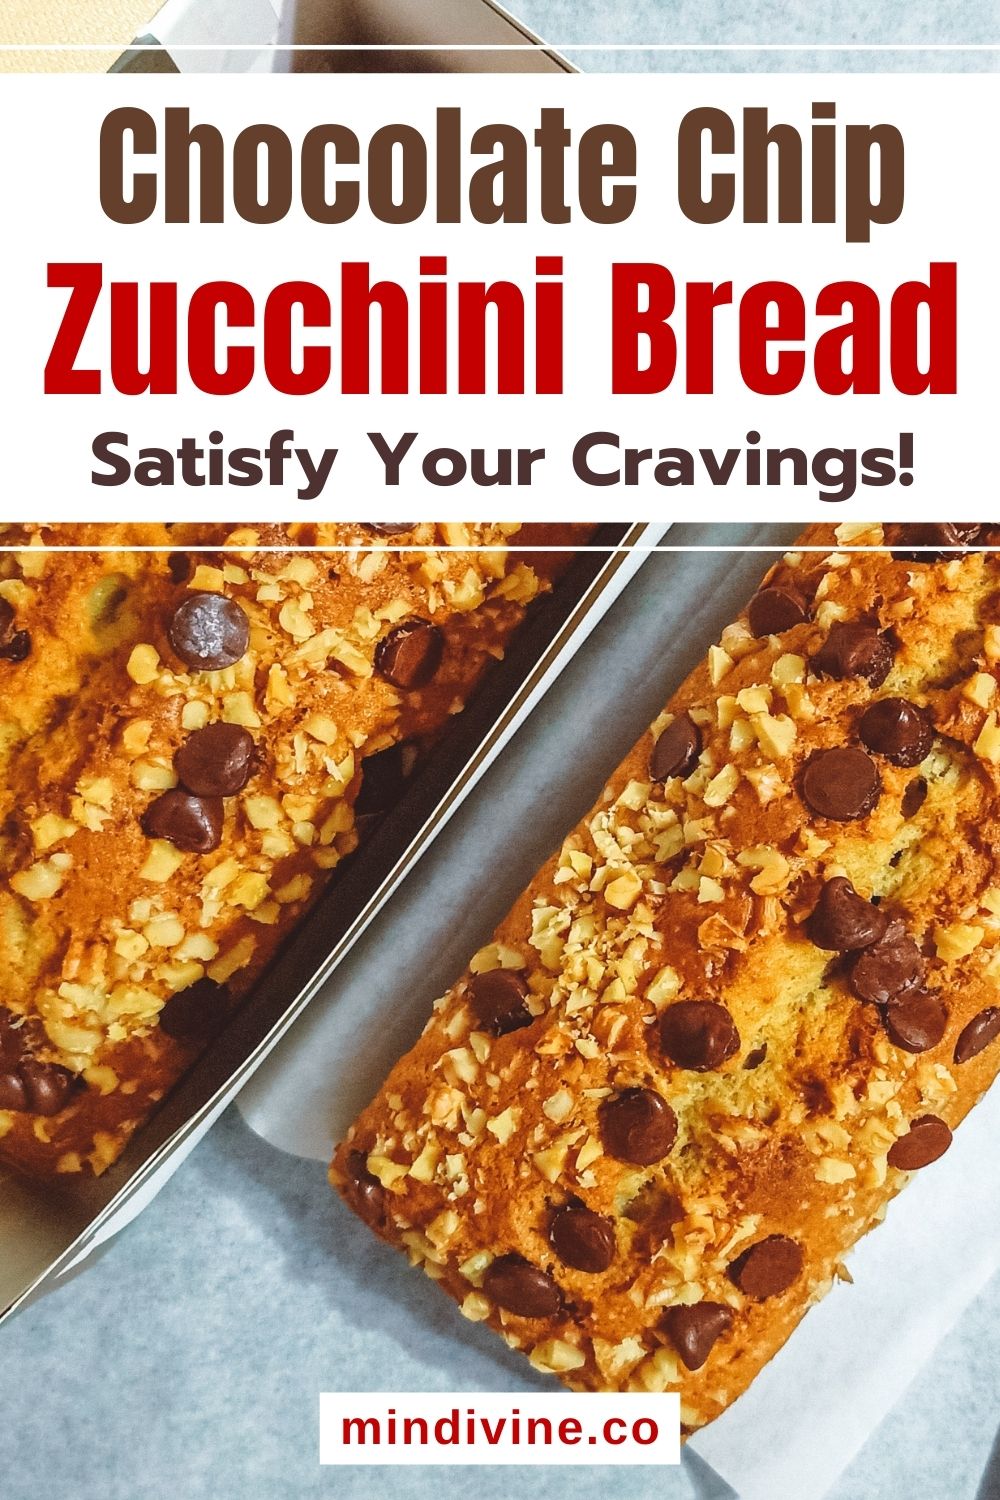 Chocolate chip zucchini breads inside baking pans.